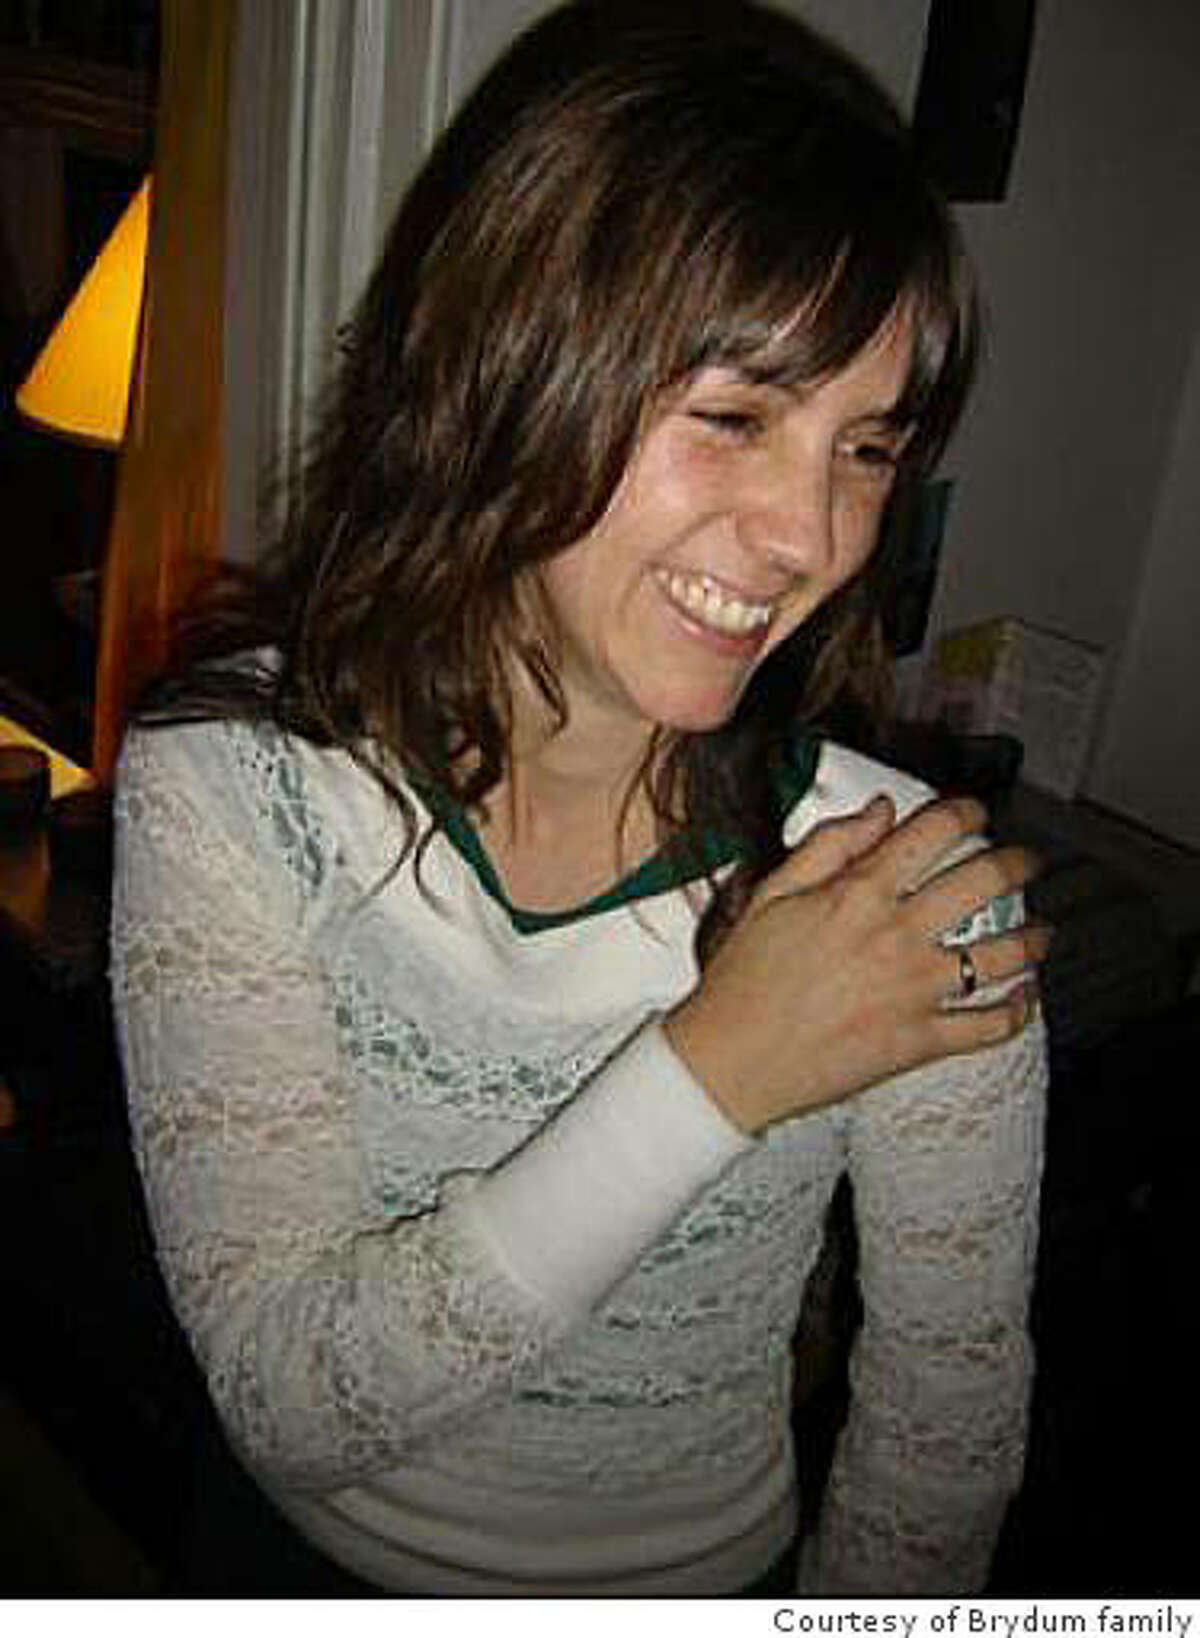 Kirsten Brydum, an SF community activist who was shot to death Sept. 27, 2008, while on a trip in New Orleans.